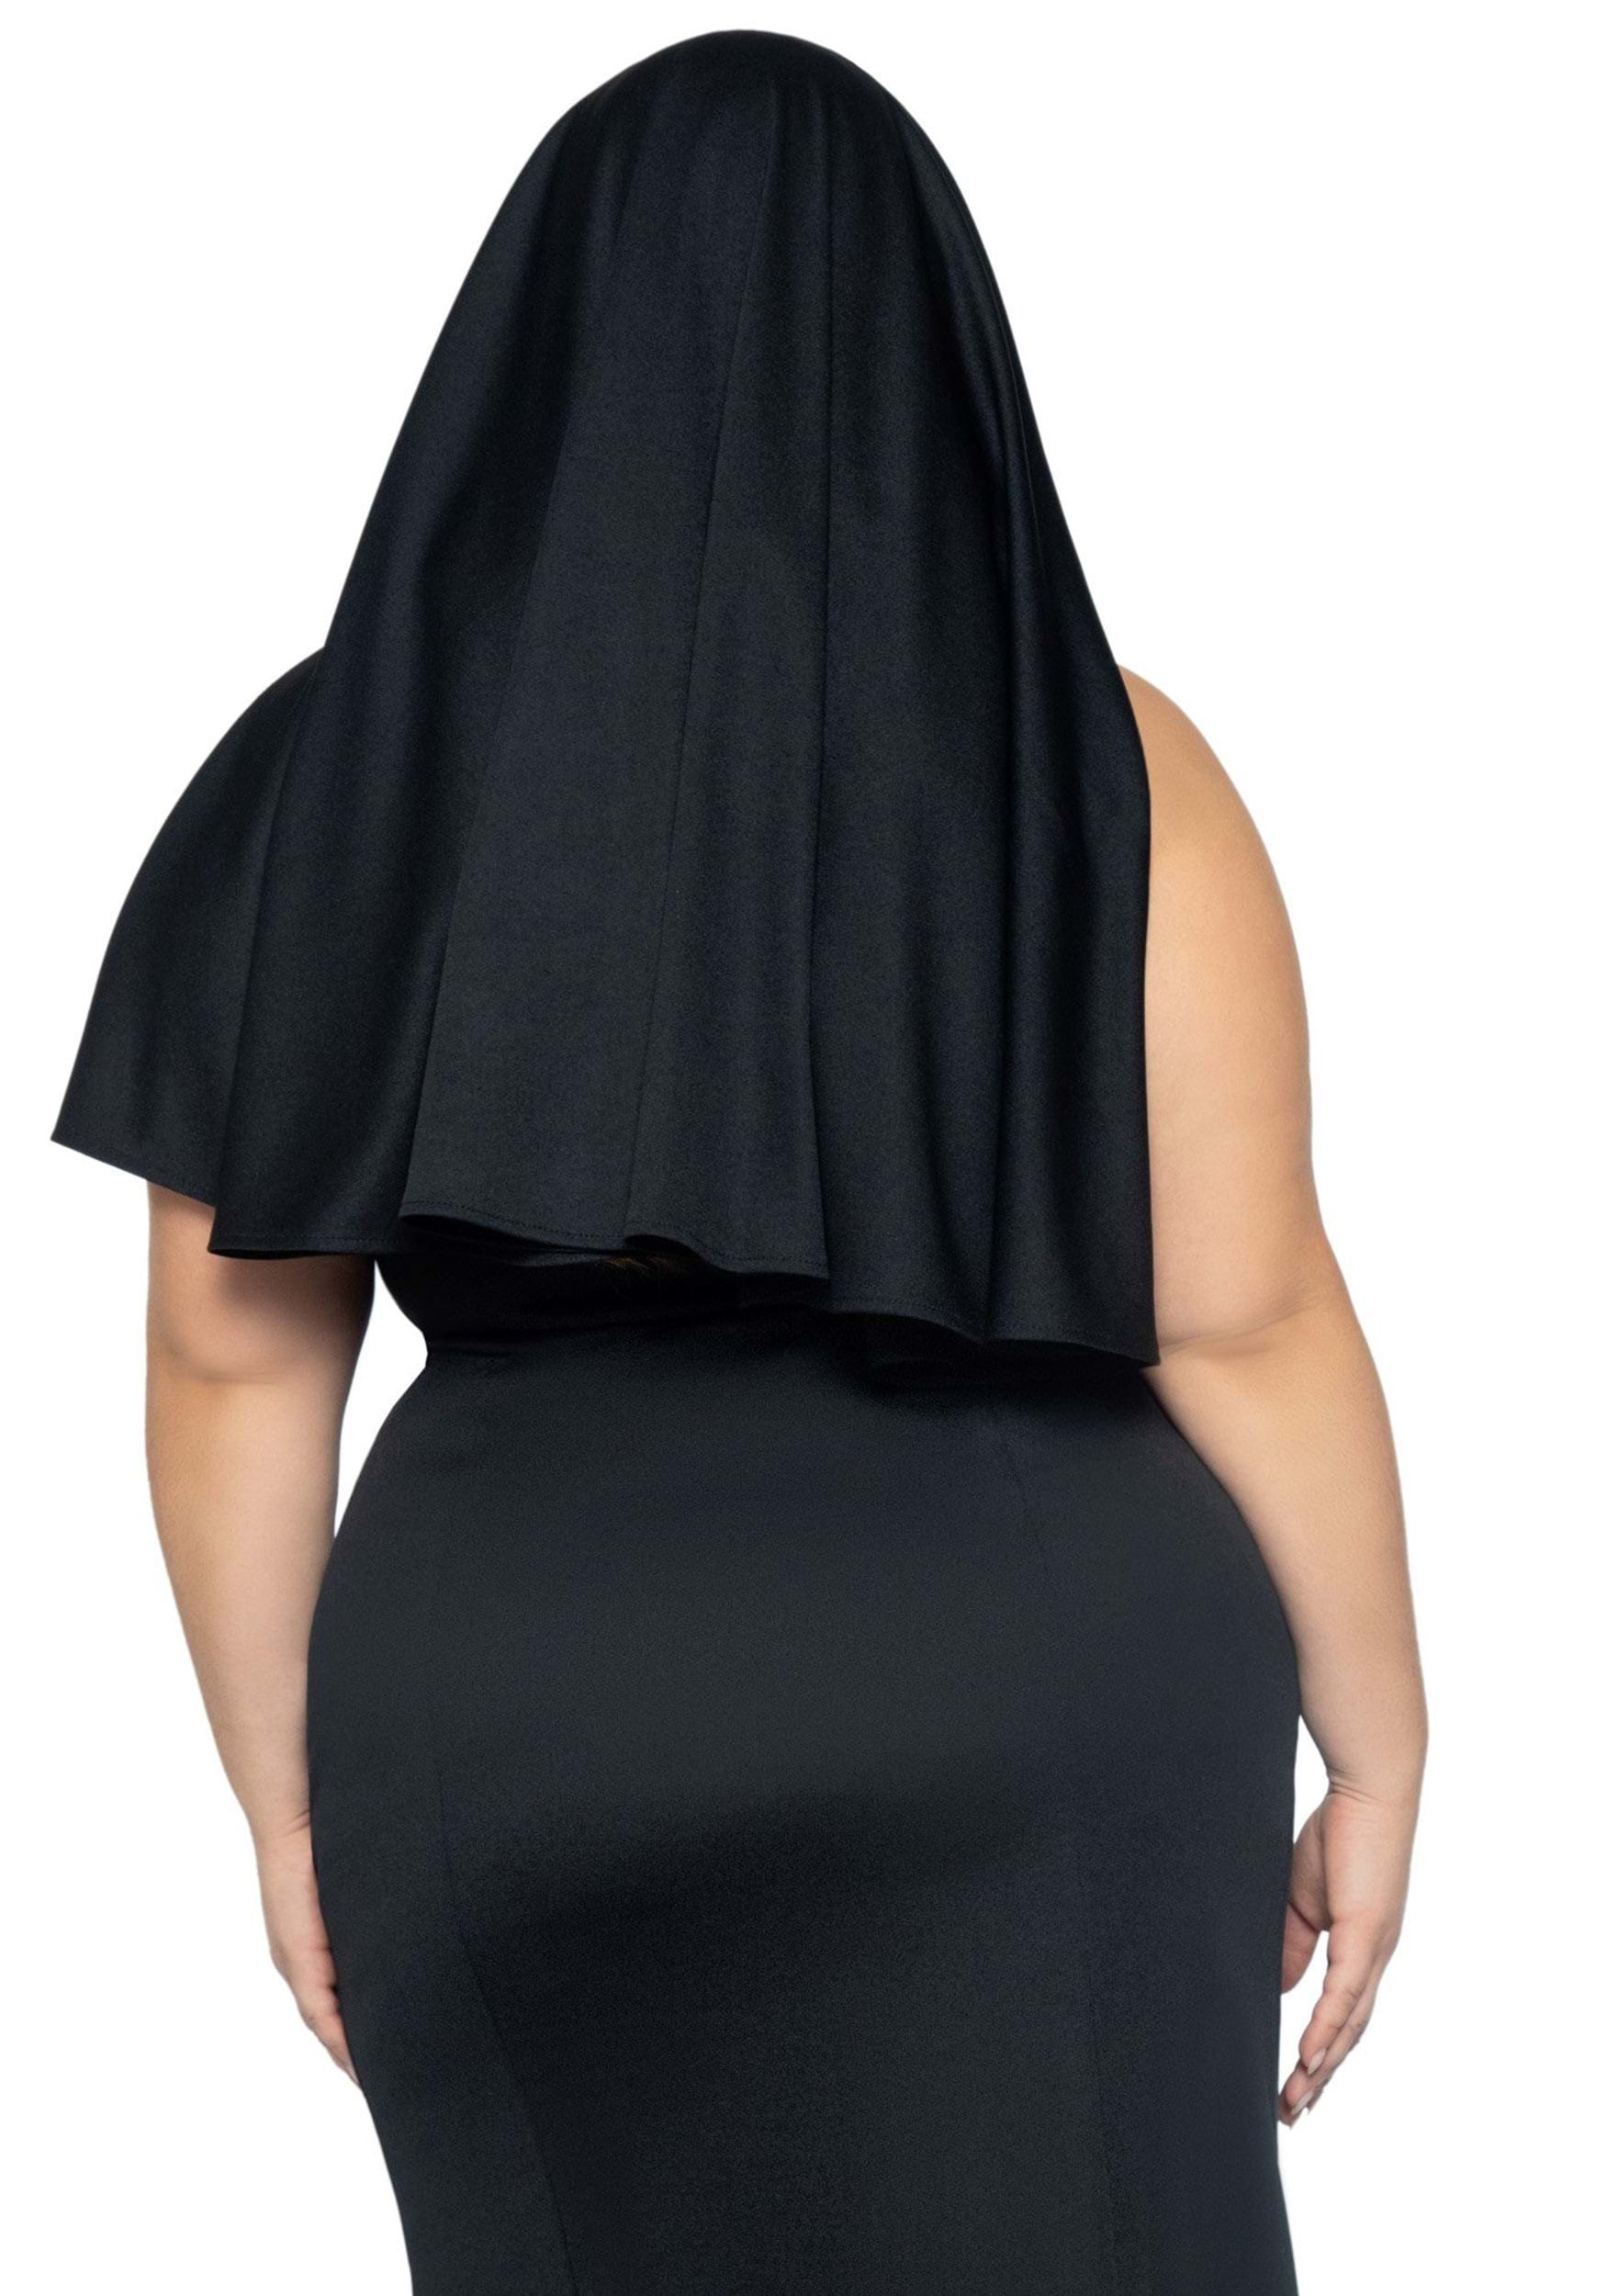 Women's Sexy Sultry Sinner Plus Size Costume